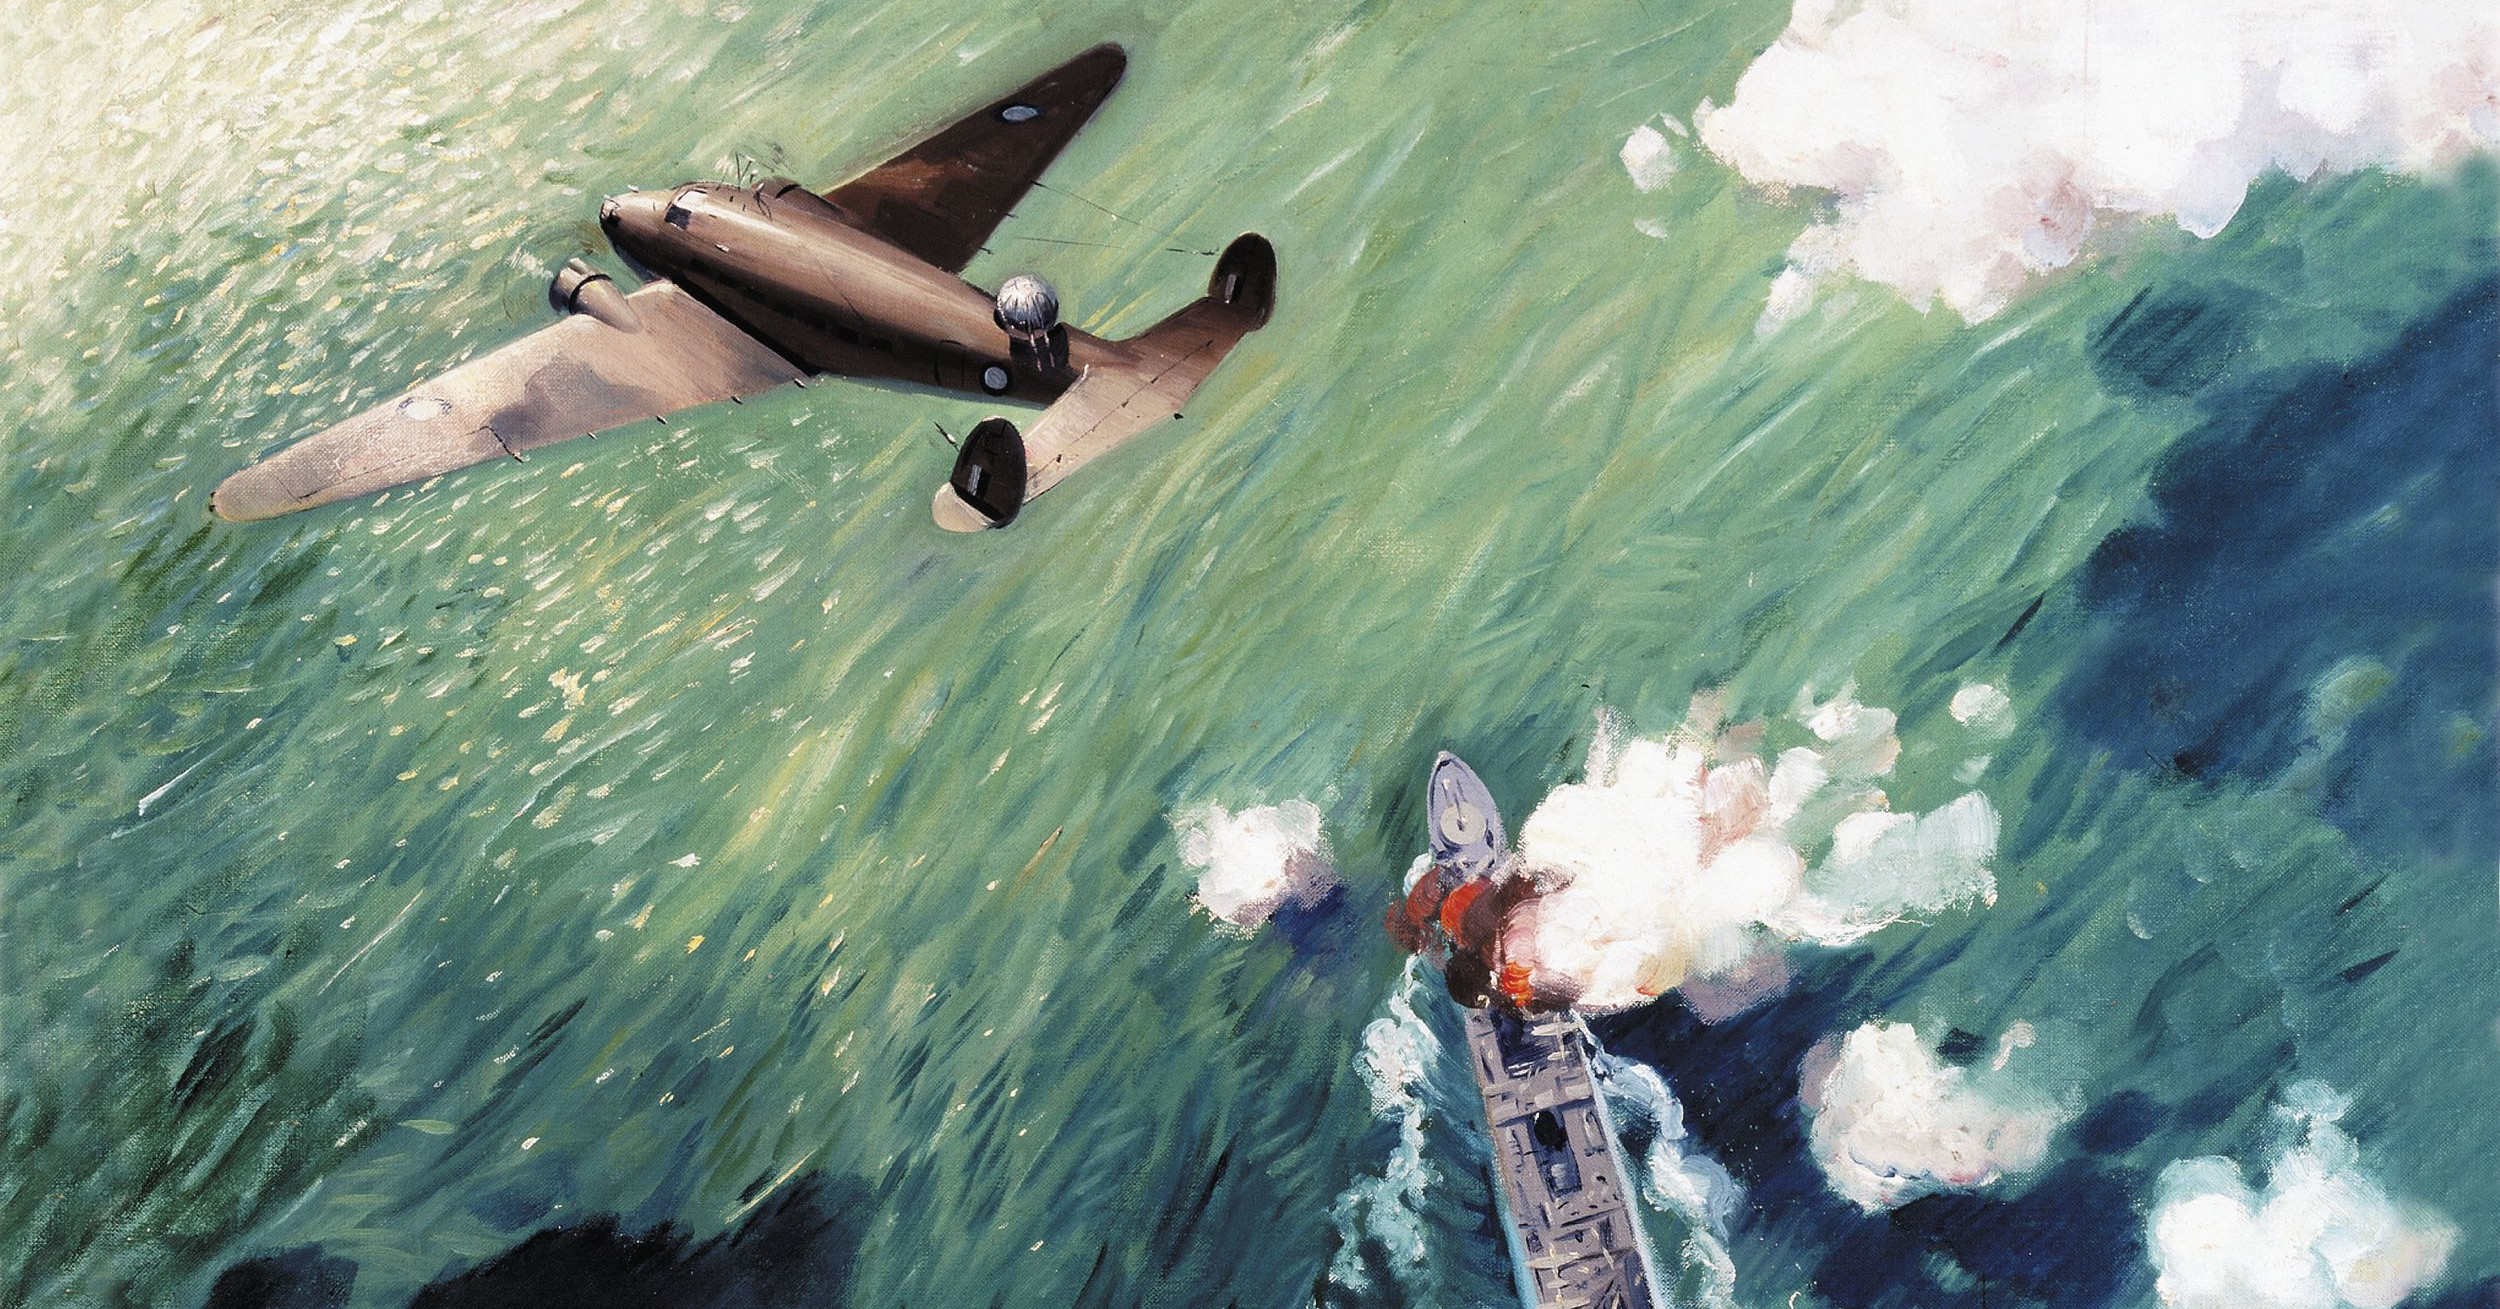 A Lockheed Hudson bomber of the Royal Australian Air Force scores a hit against a Japanese freighter near Port Moresby, New Guinea.Variants of the Lockheed Electra and Lodestar designs saw service around the globe during World War II.